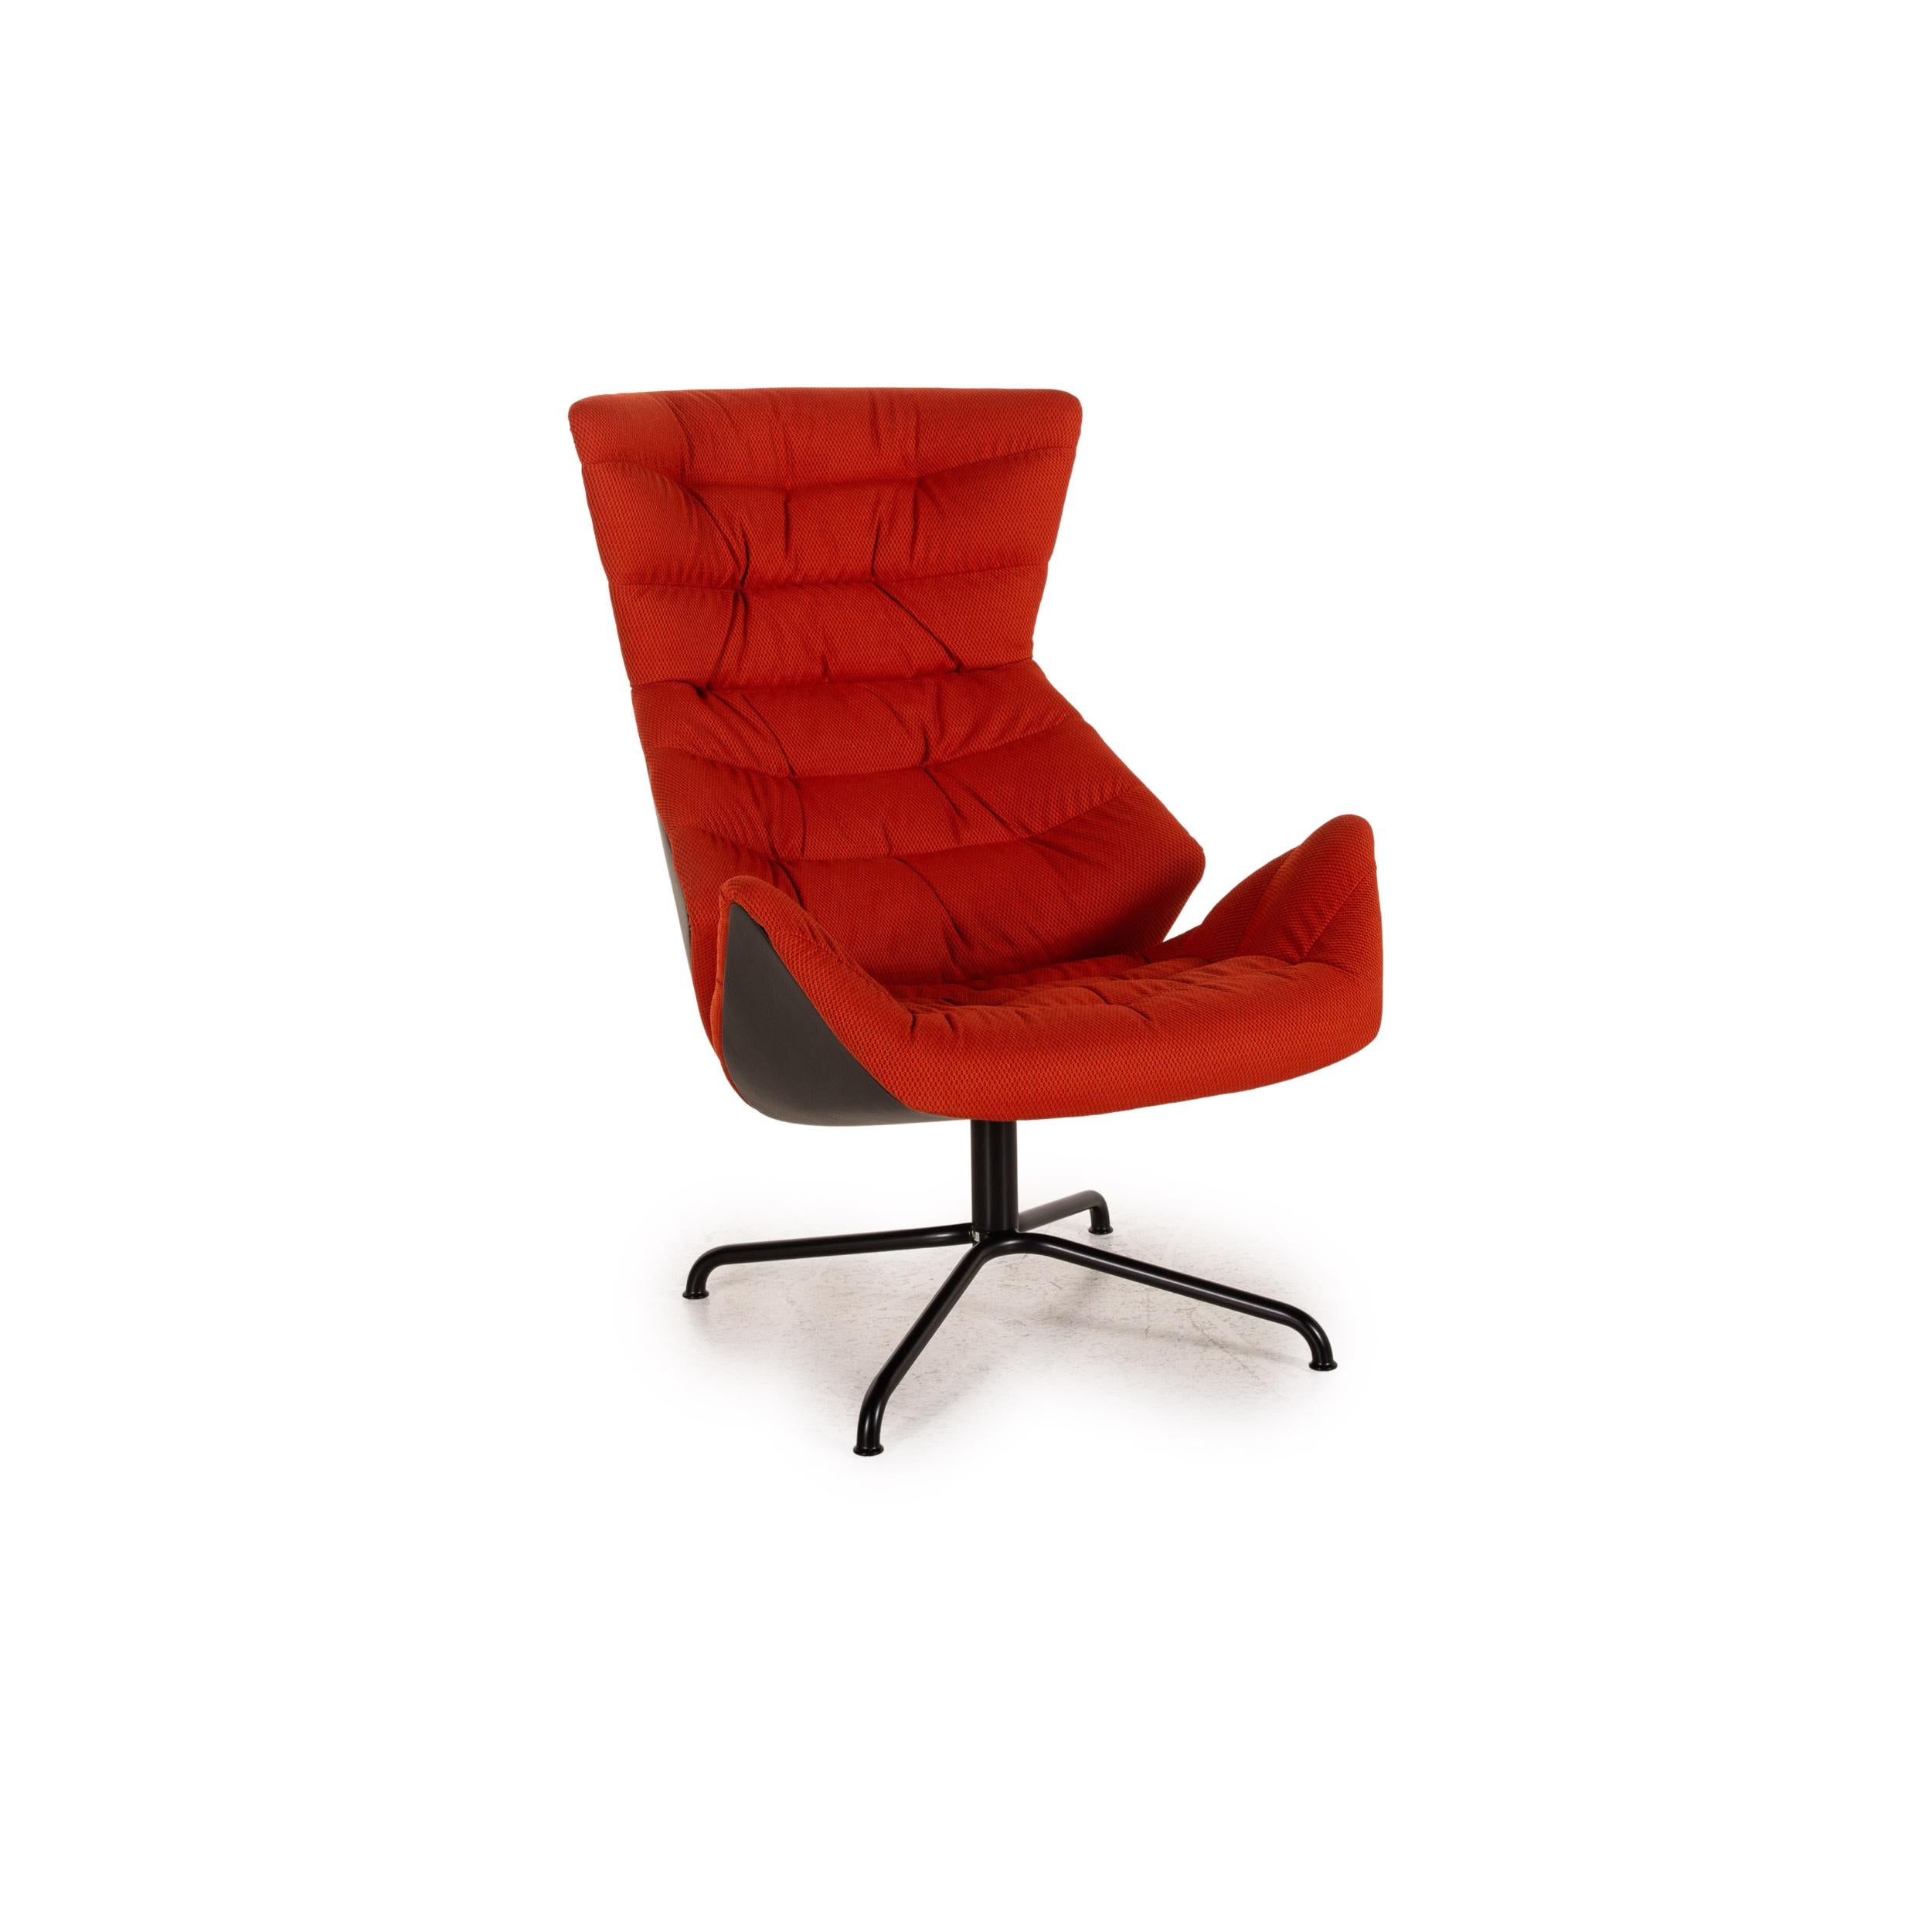 Modern Thonet 808 Fabric Armchair Incl. Stool Orange Armchair Function Relax Function For Sale